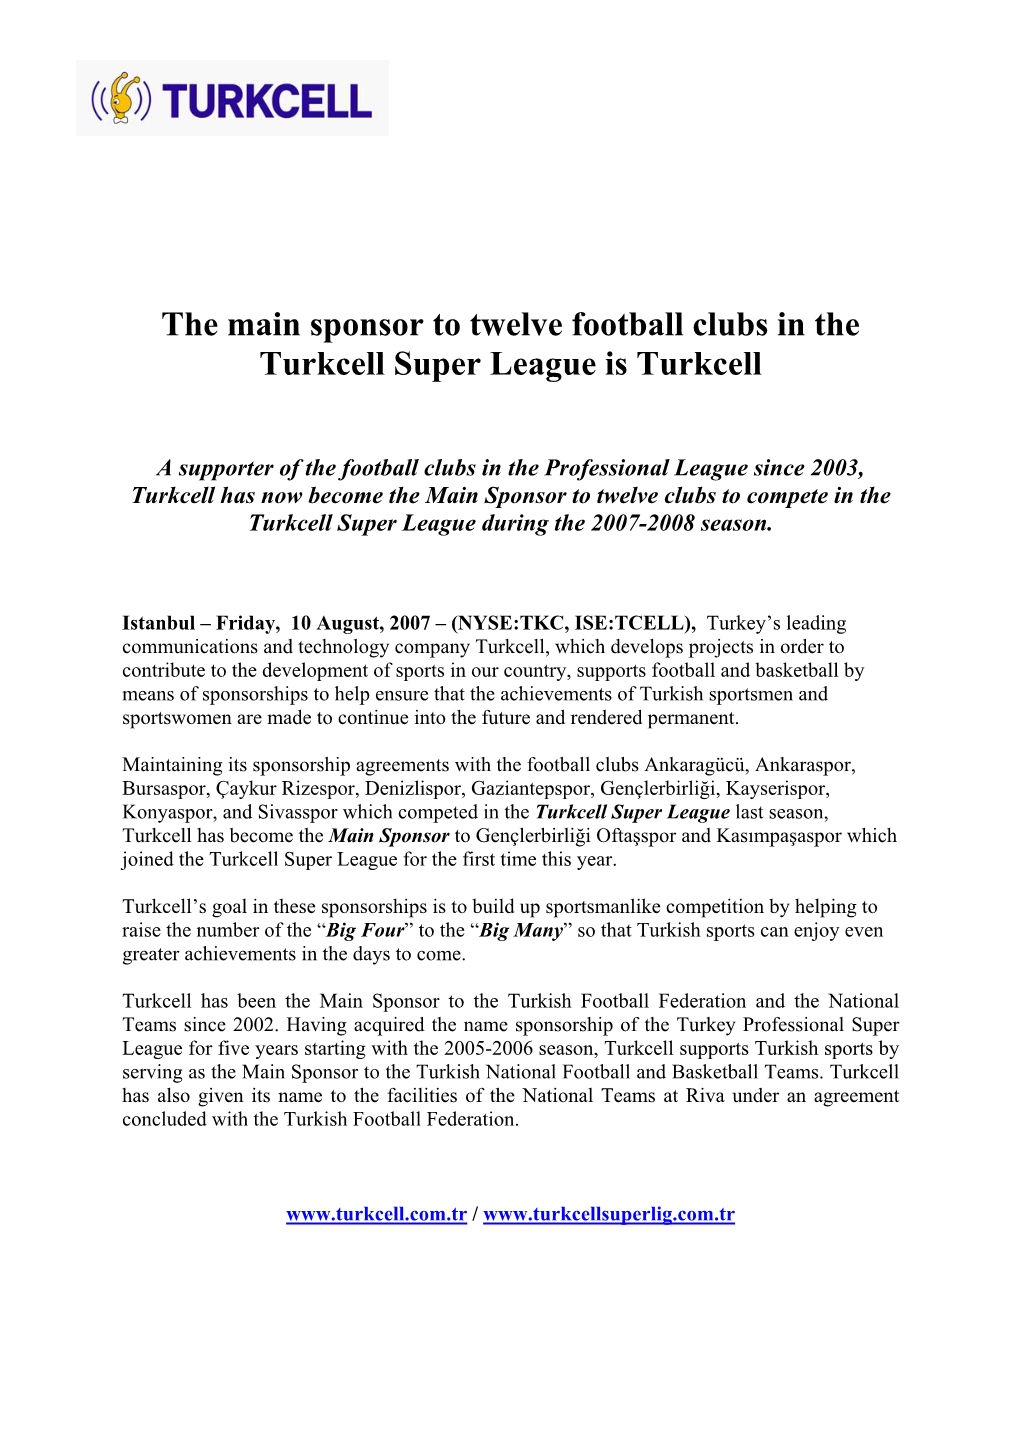 The Main Sponsor to Twelve Football Clubs in the Turkcell Super League Is Turkcell